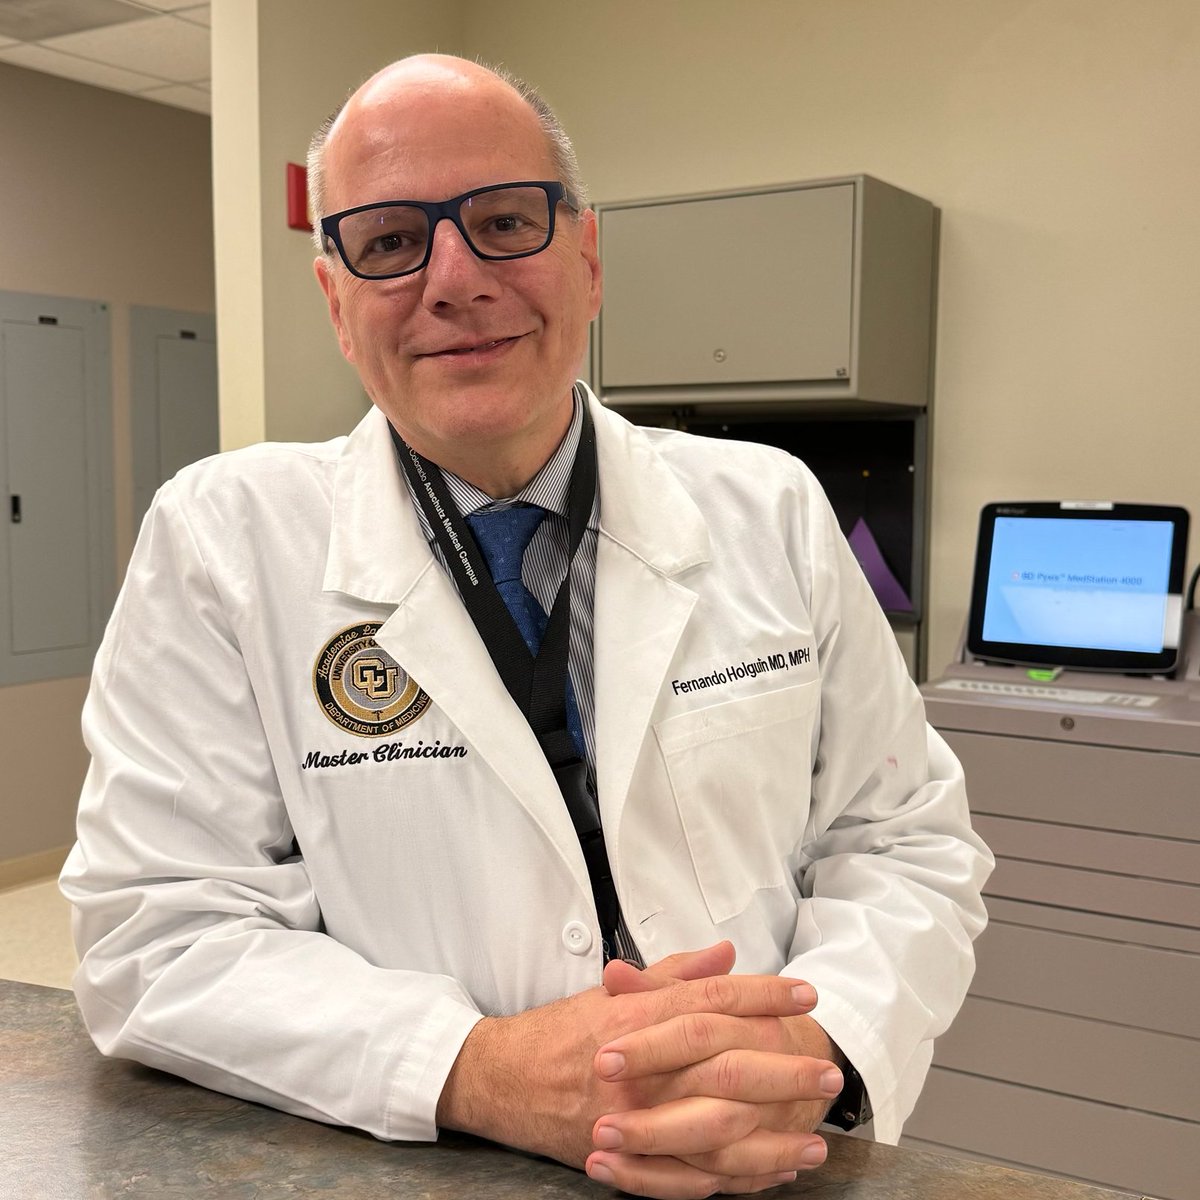 Spotted! Our own Fernando Holguin, MD, sporting his new, sparkling white Clinical Excellence Society lab coat while on service this week. Have our other Clinical Excellence Society members broken in their white coats yet?